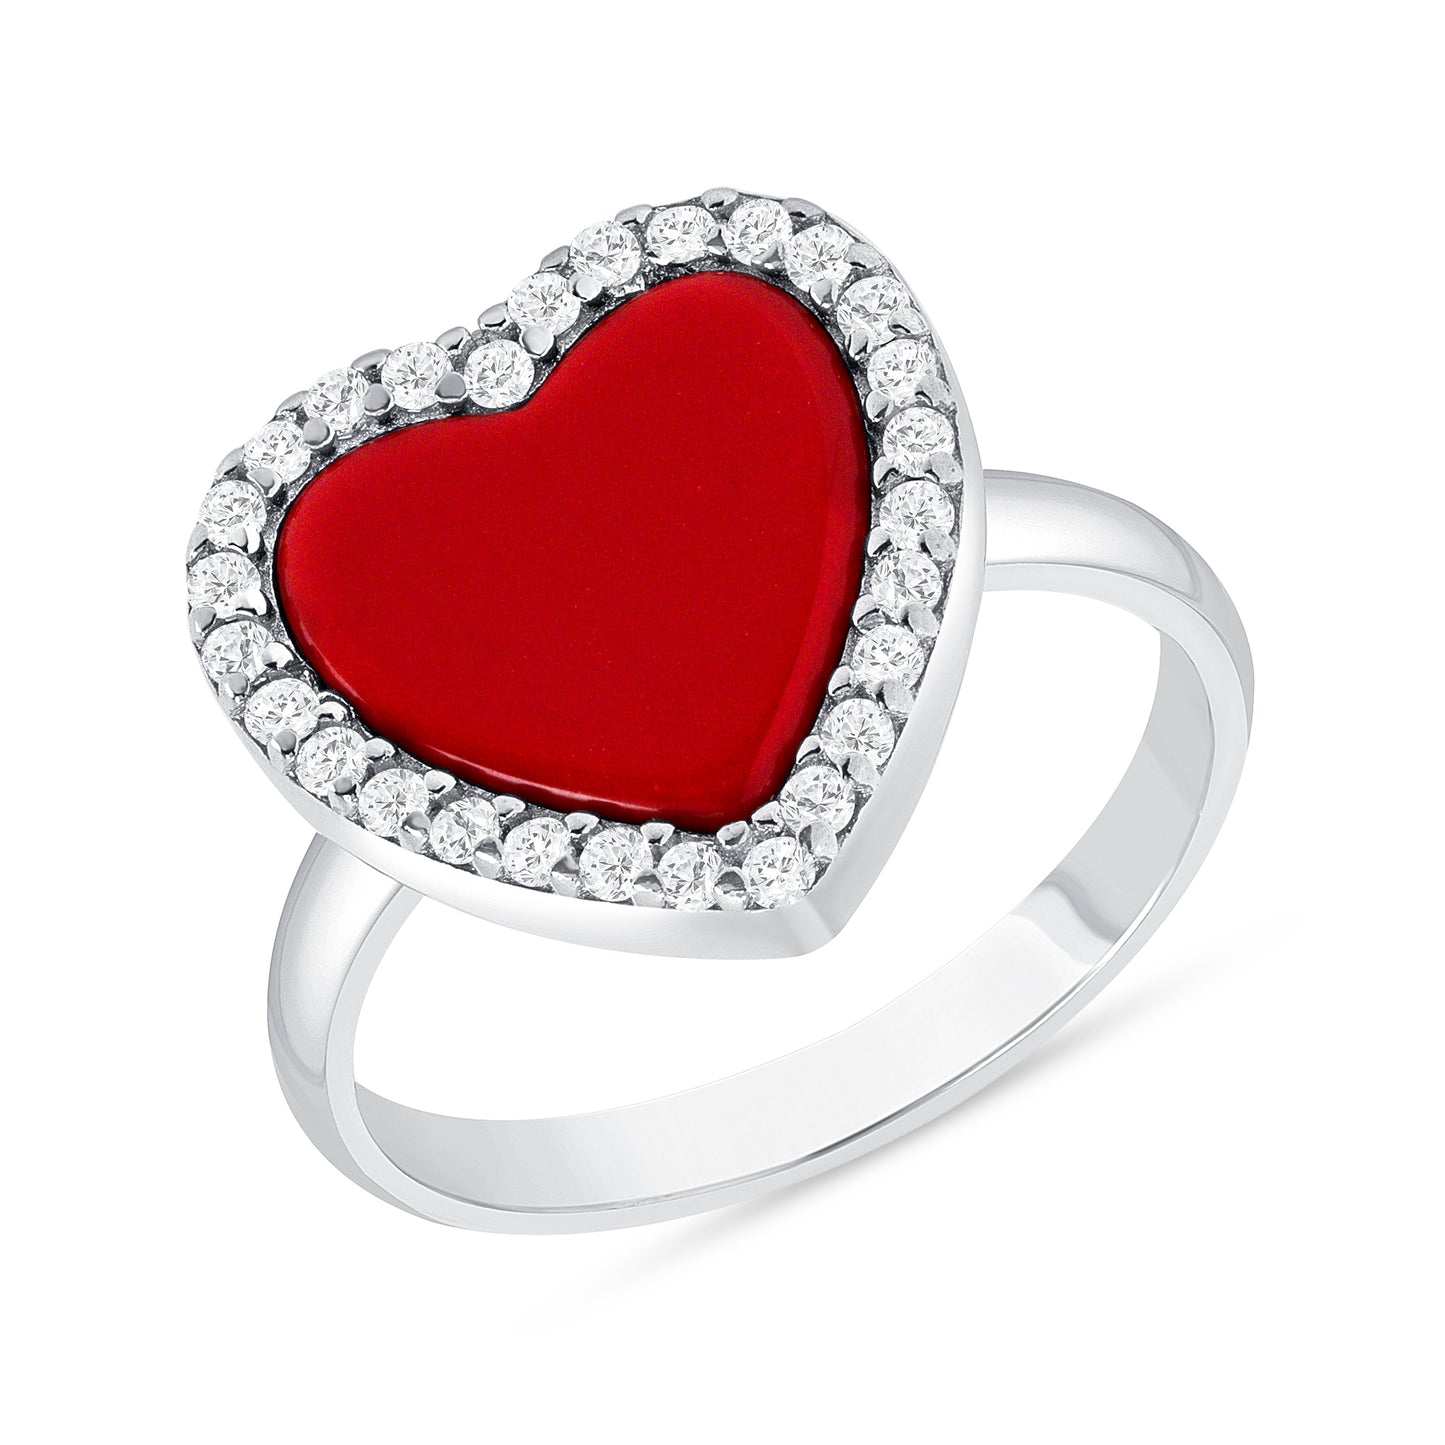 Silver 925 Heart Shape Pave Red Stone Ring. MHY29